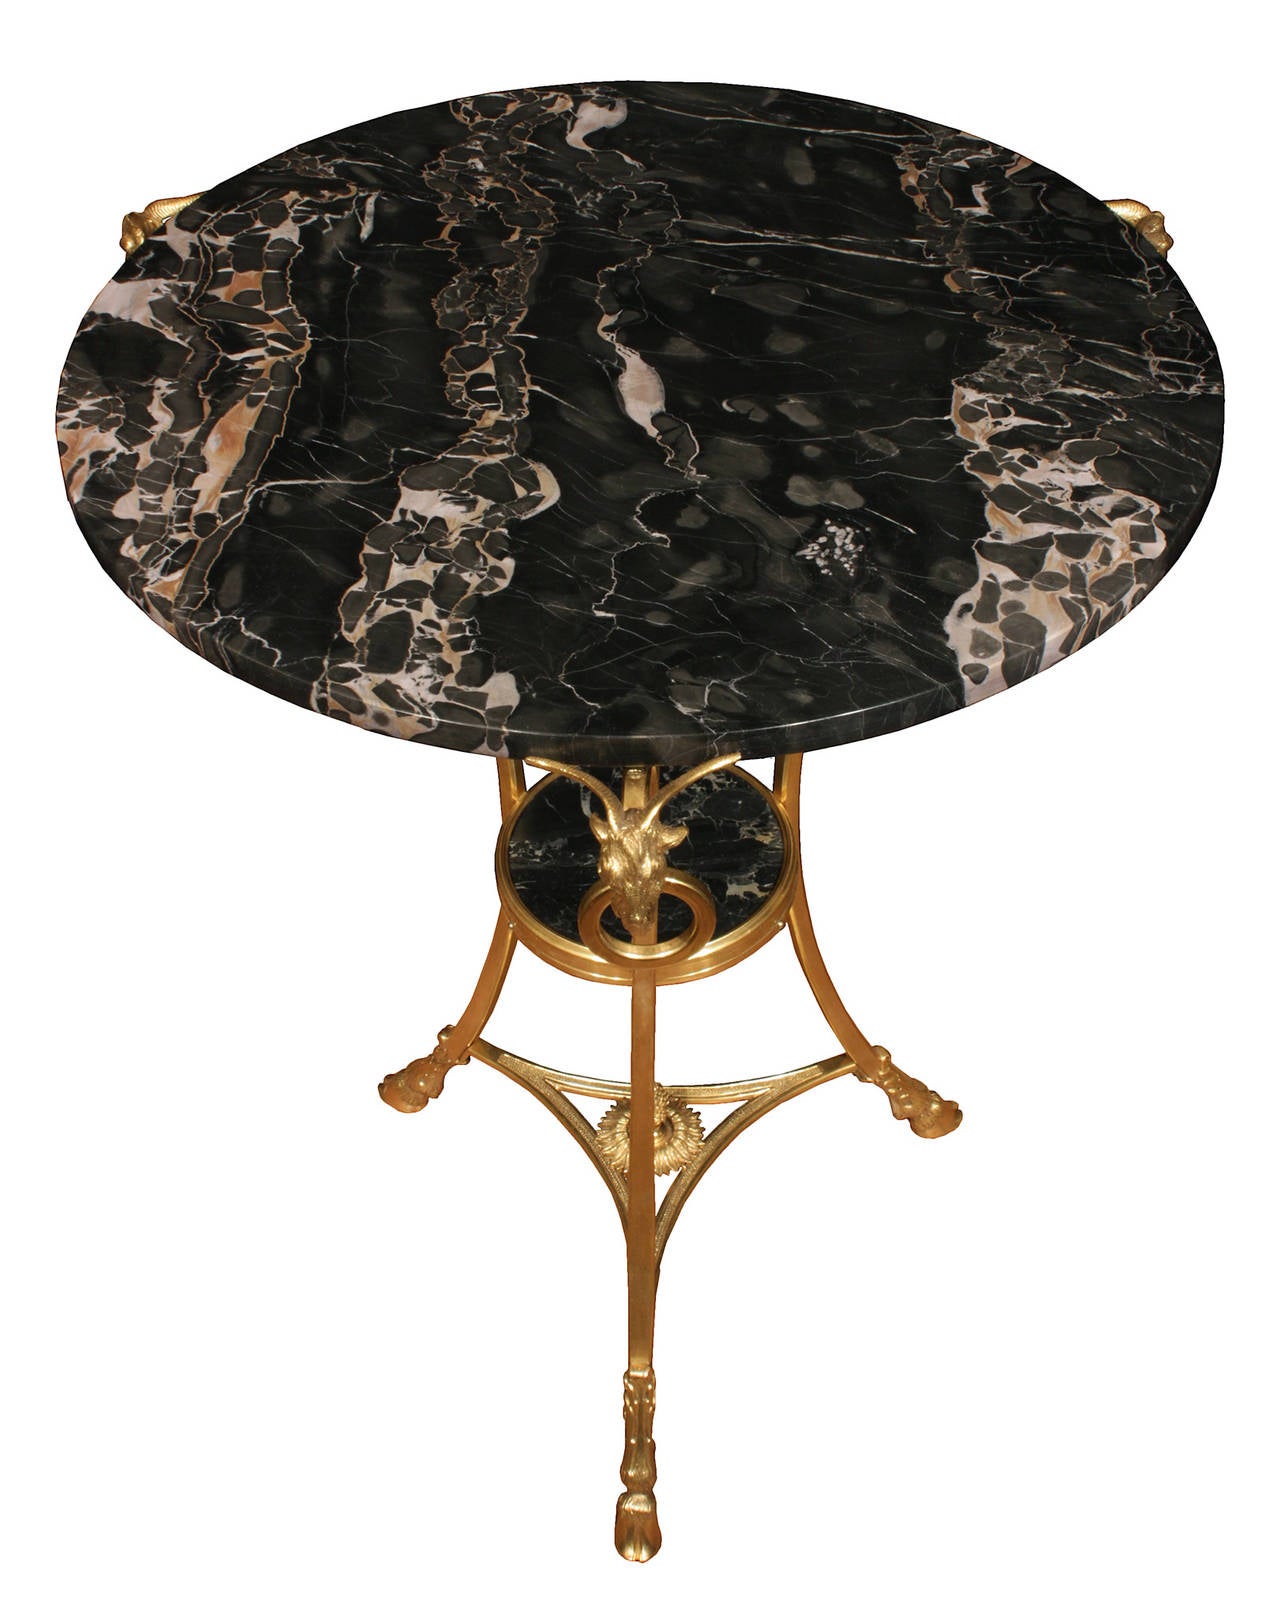 A striking pair of French 19th century Louis XVI style ormolu and marble guéridons. Each table is raised on an ormolu tripod base with handsome hoof feet and acanthus leaf chasing below C scrolled legs. The lower pierced triangular stretcher has